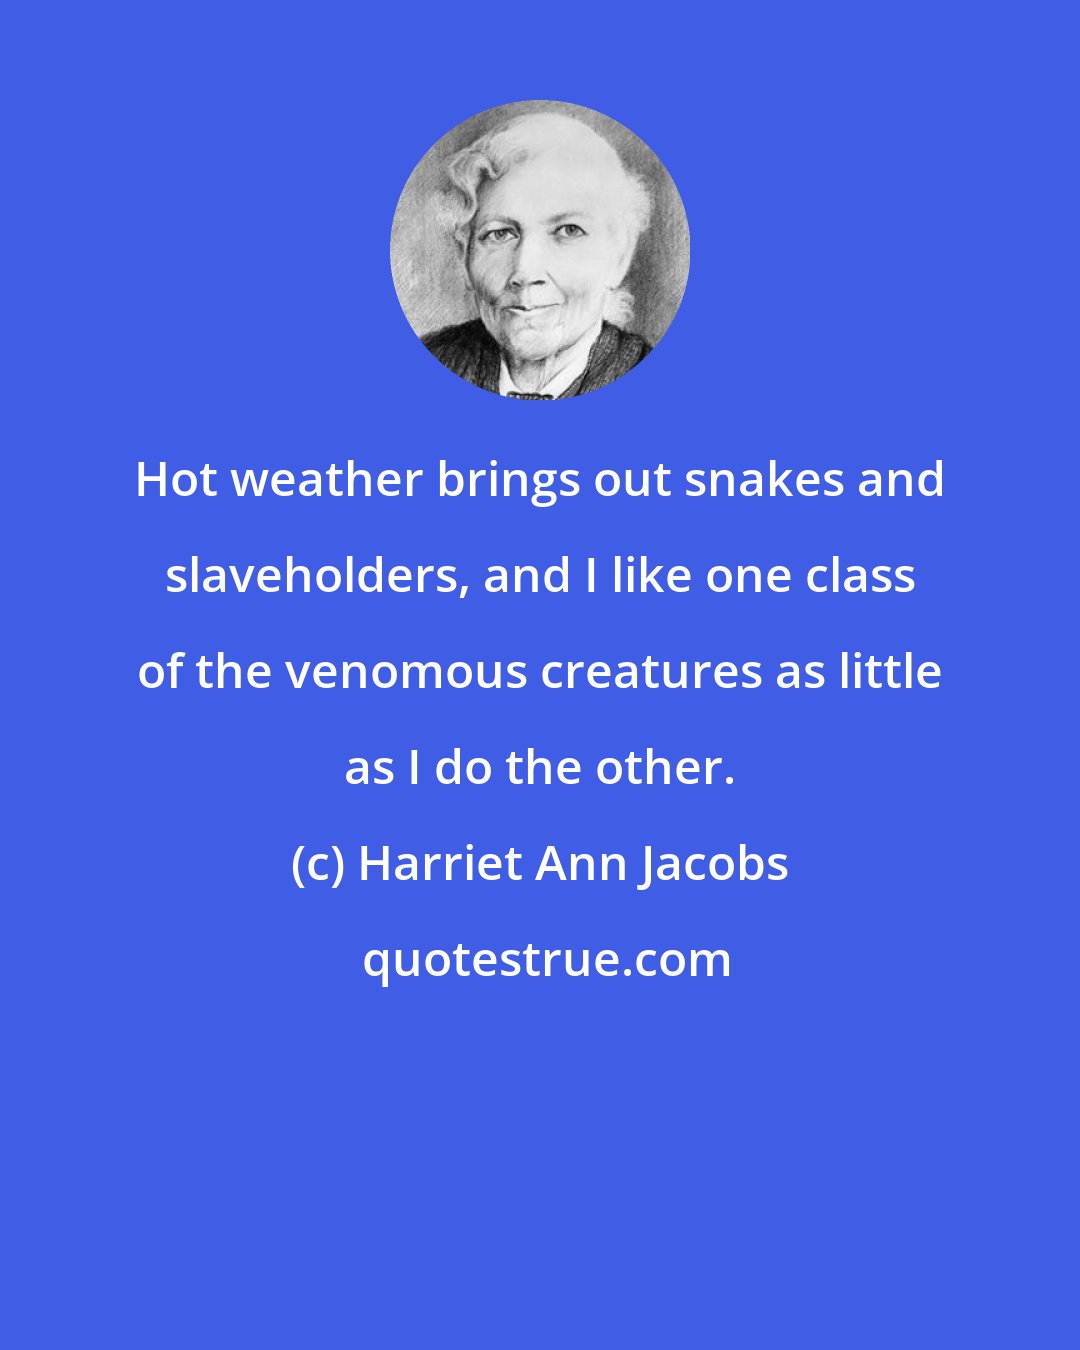 Harriet Ann Jacobs: Hot weather brings out snakes and slaveholders, and I like one class of the venomous creatures as little as I do the other.